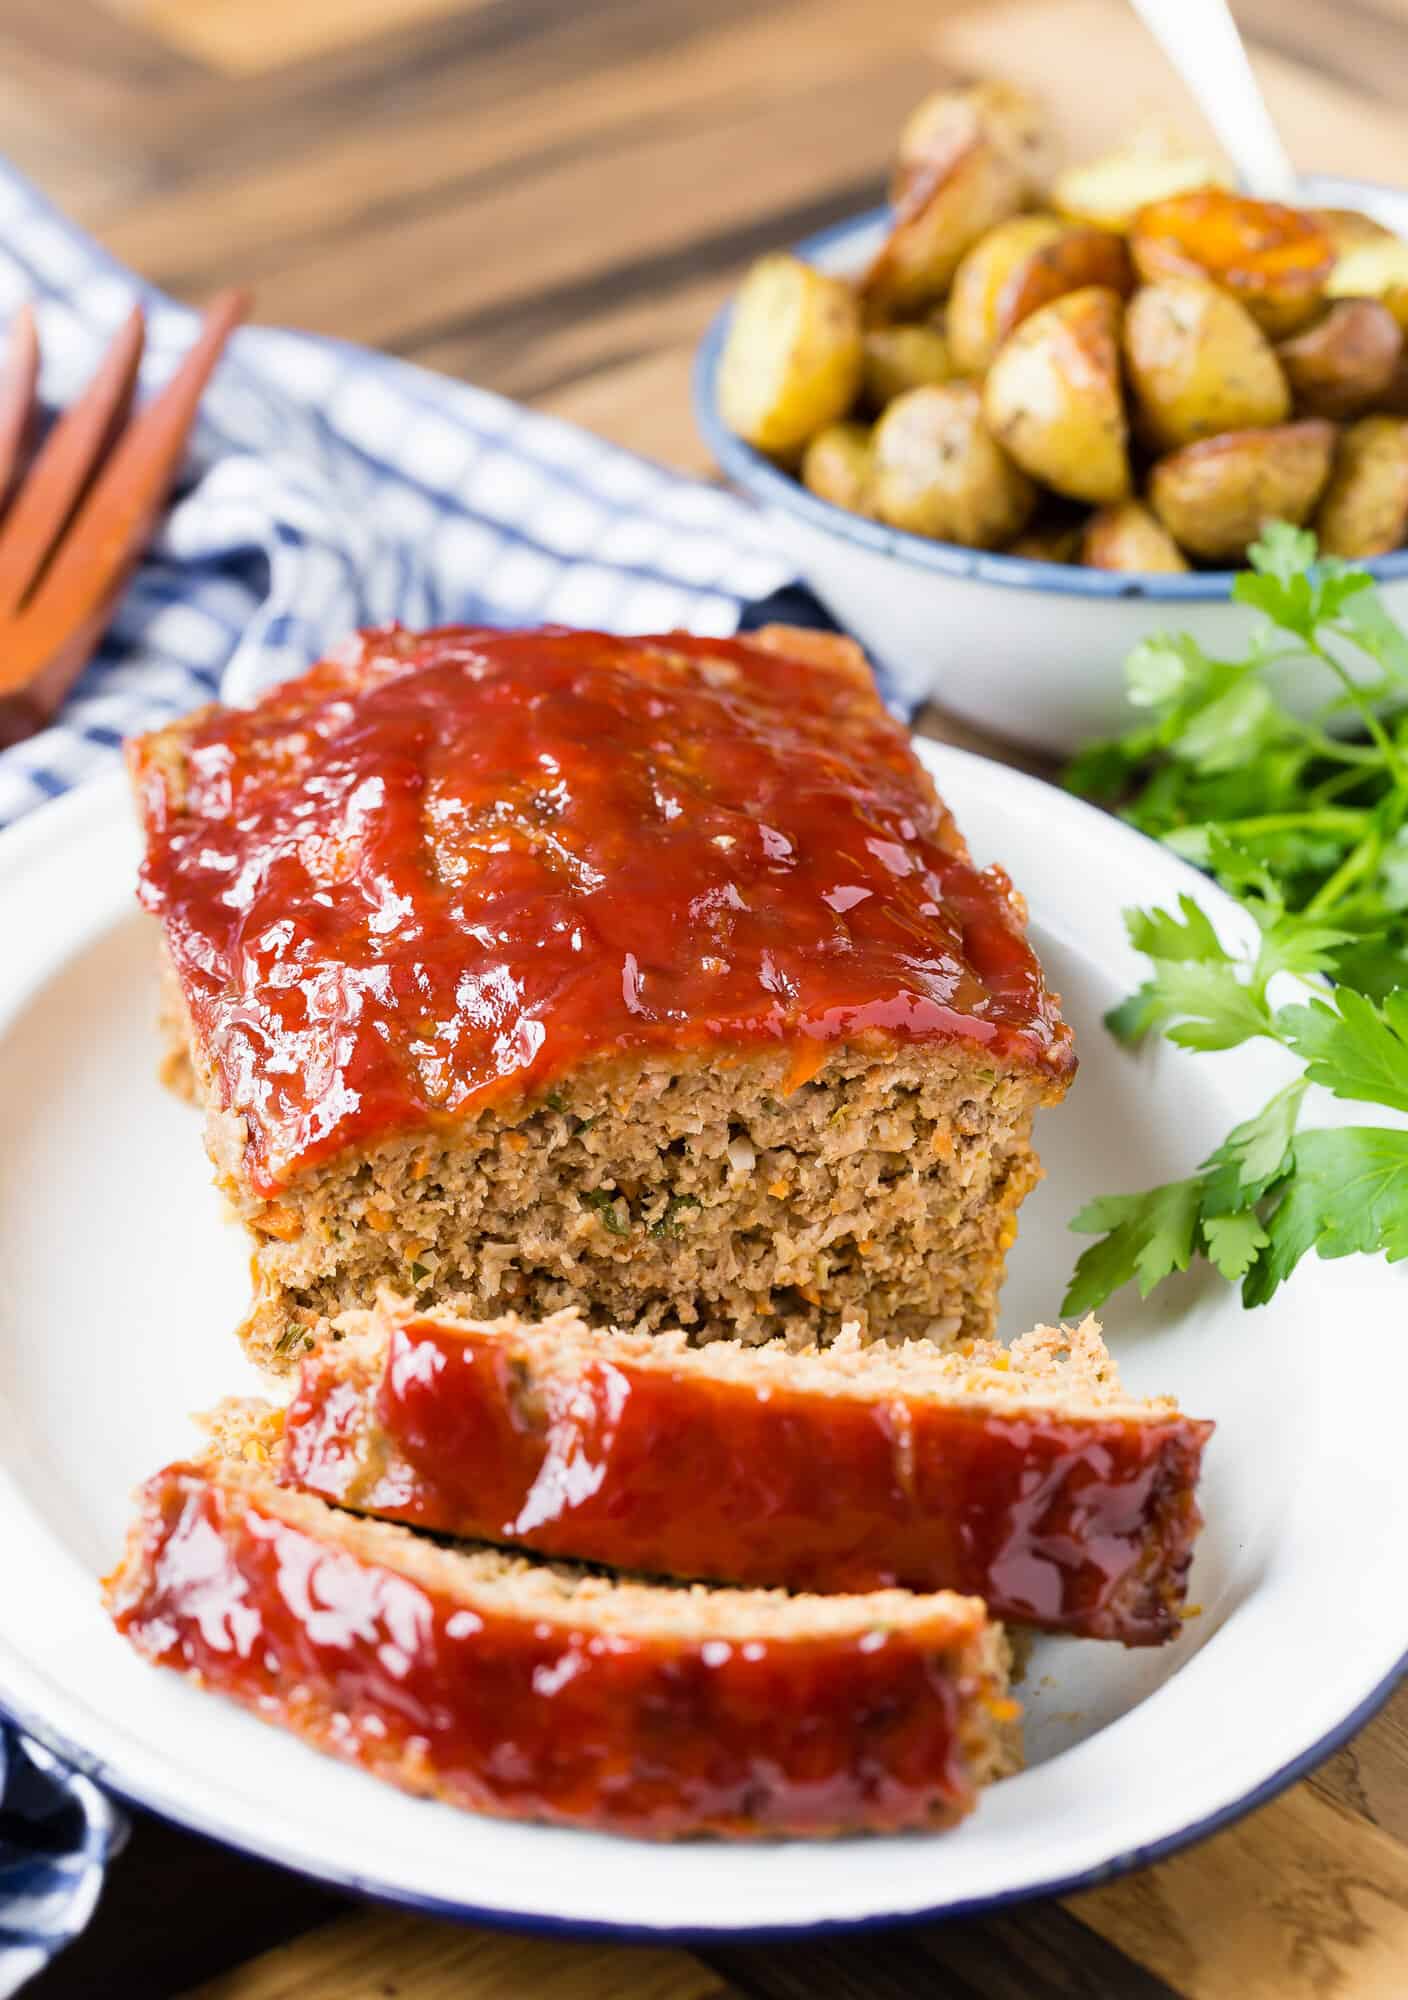 Classic meatloaf with a tomato glaze, a couple of slices sliced.